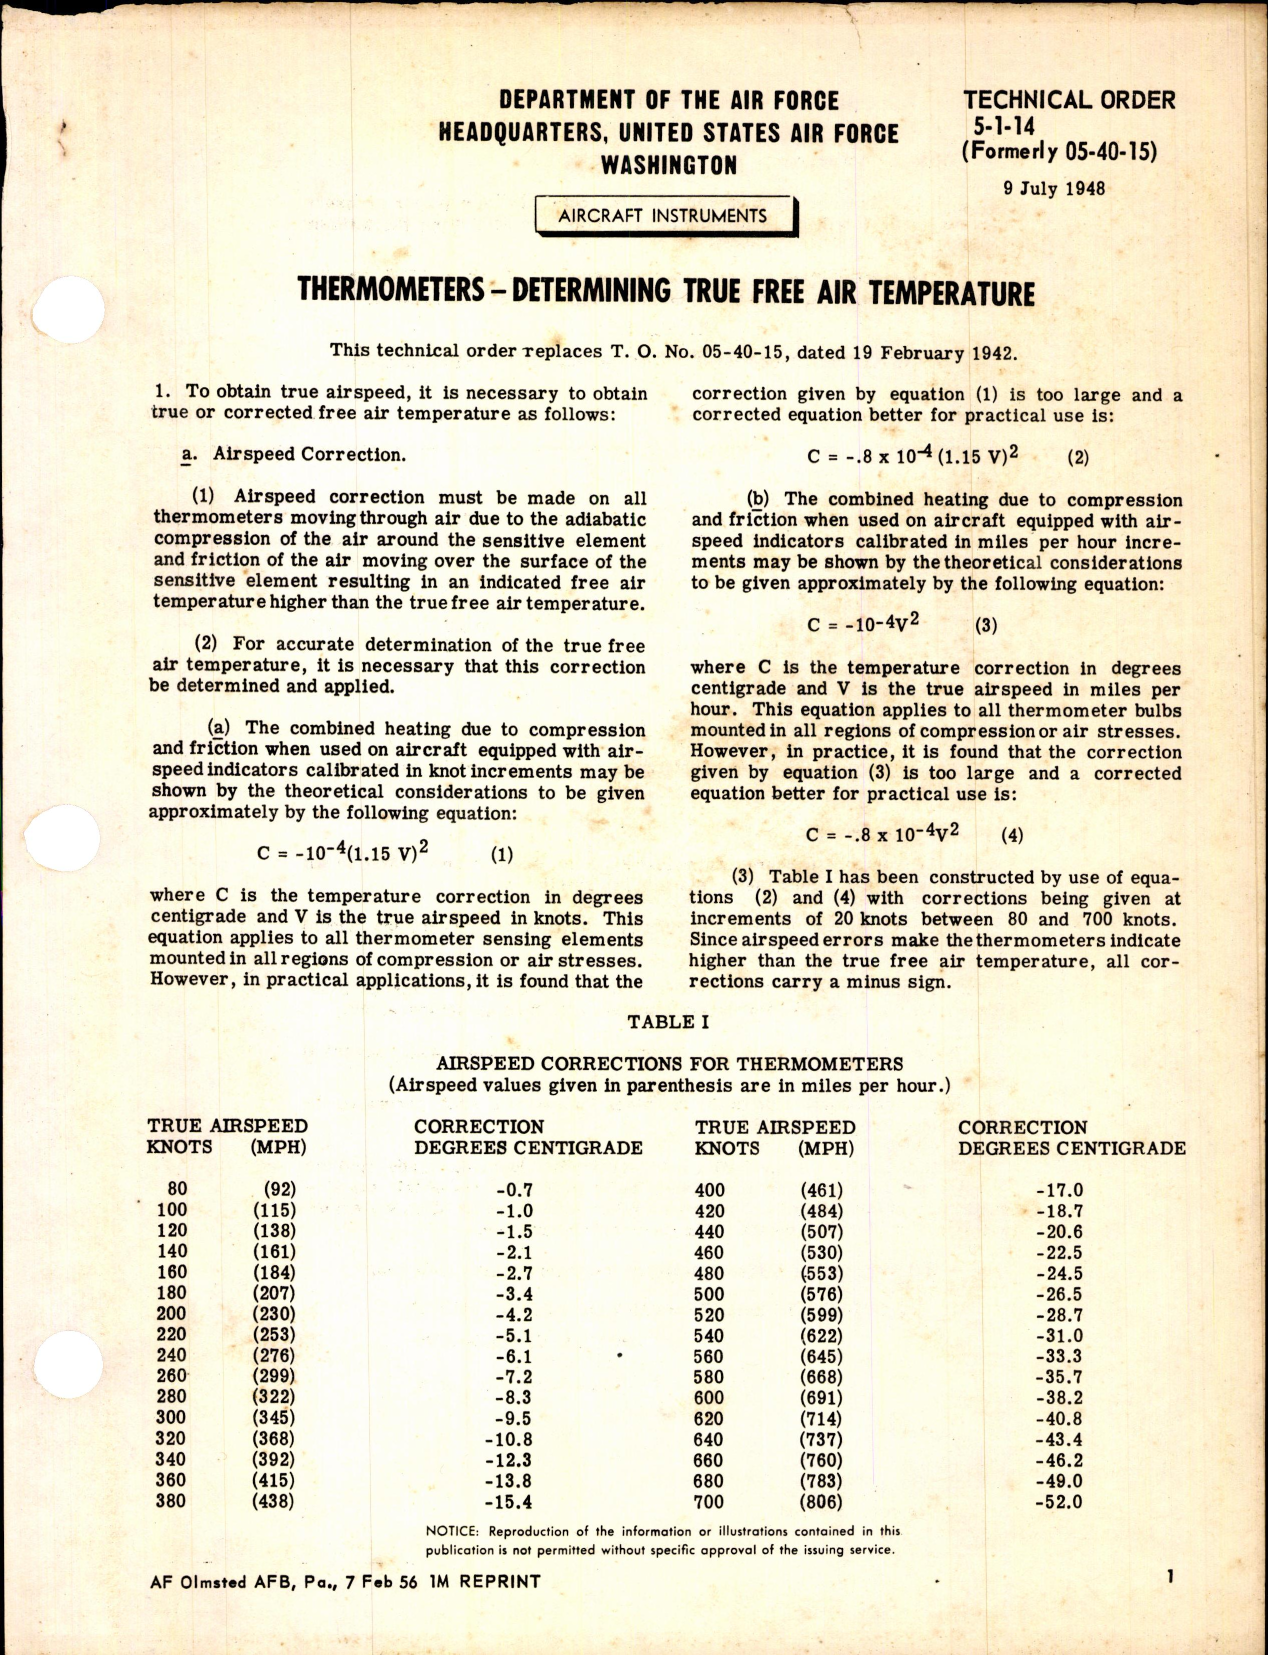 Sample page 1 from AirCorps Library document: Thermometers - Determining True Free Air Temperature